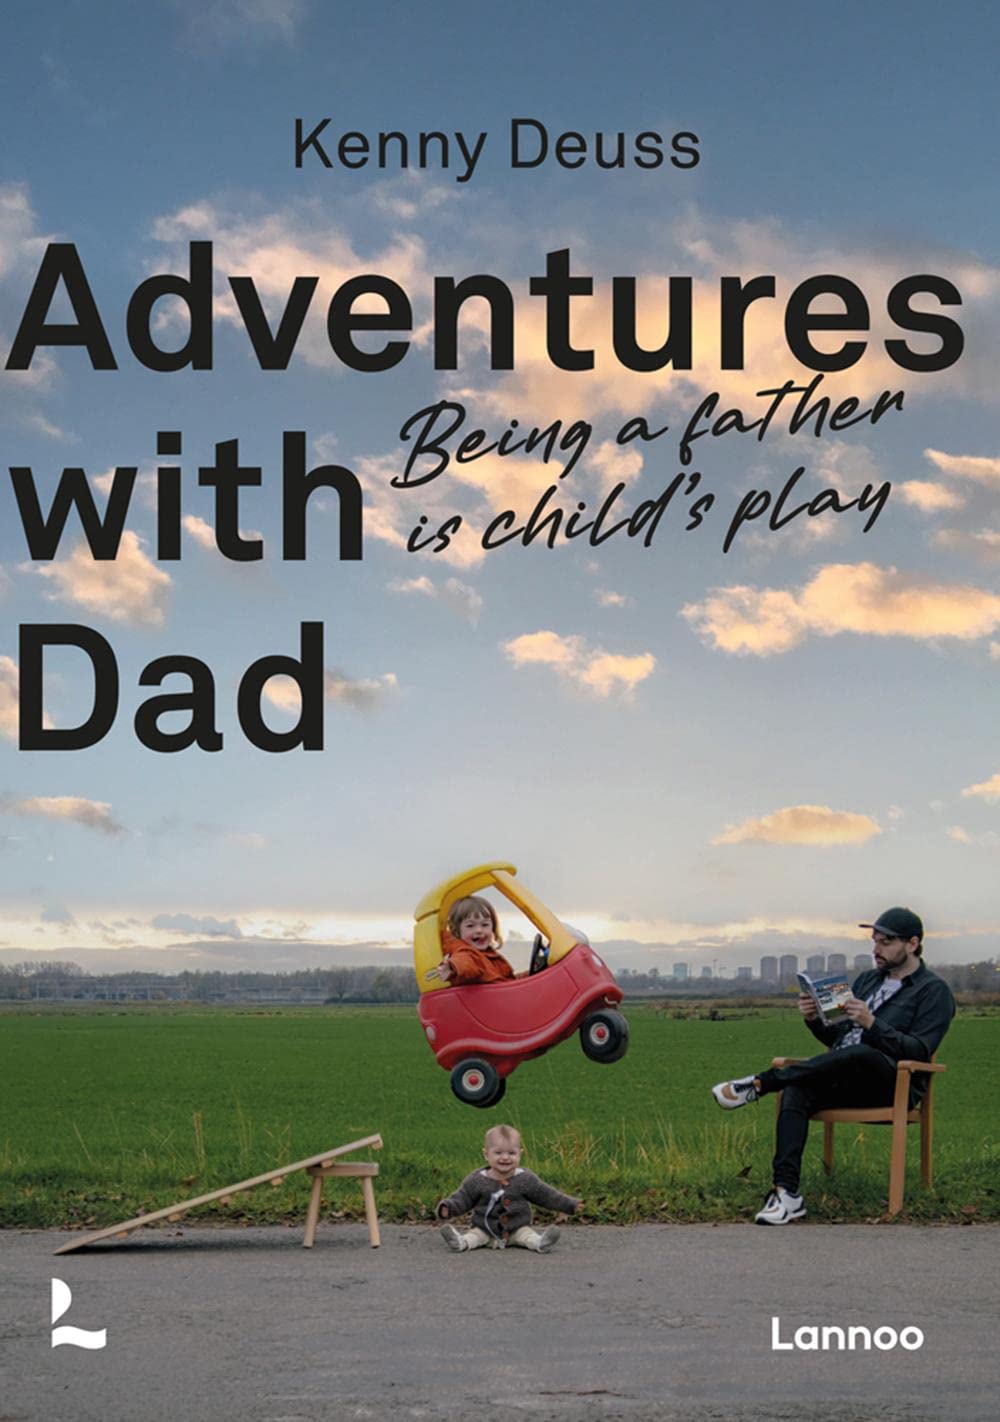 Adventures with Dad: Being a Father Is Child's Play - SureShot Books Publishing LLC